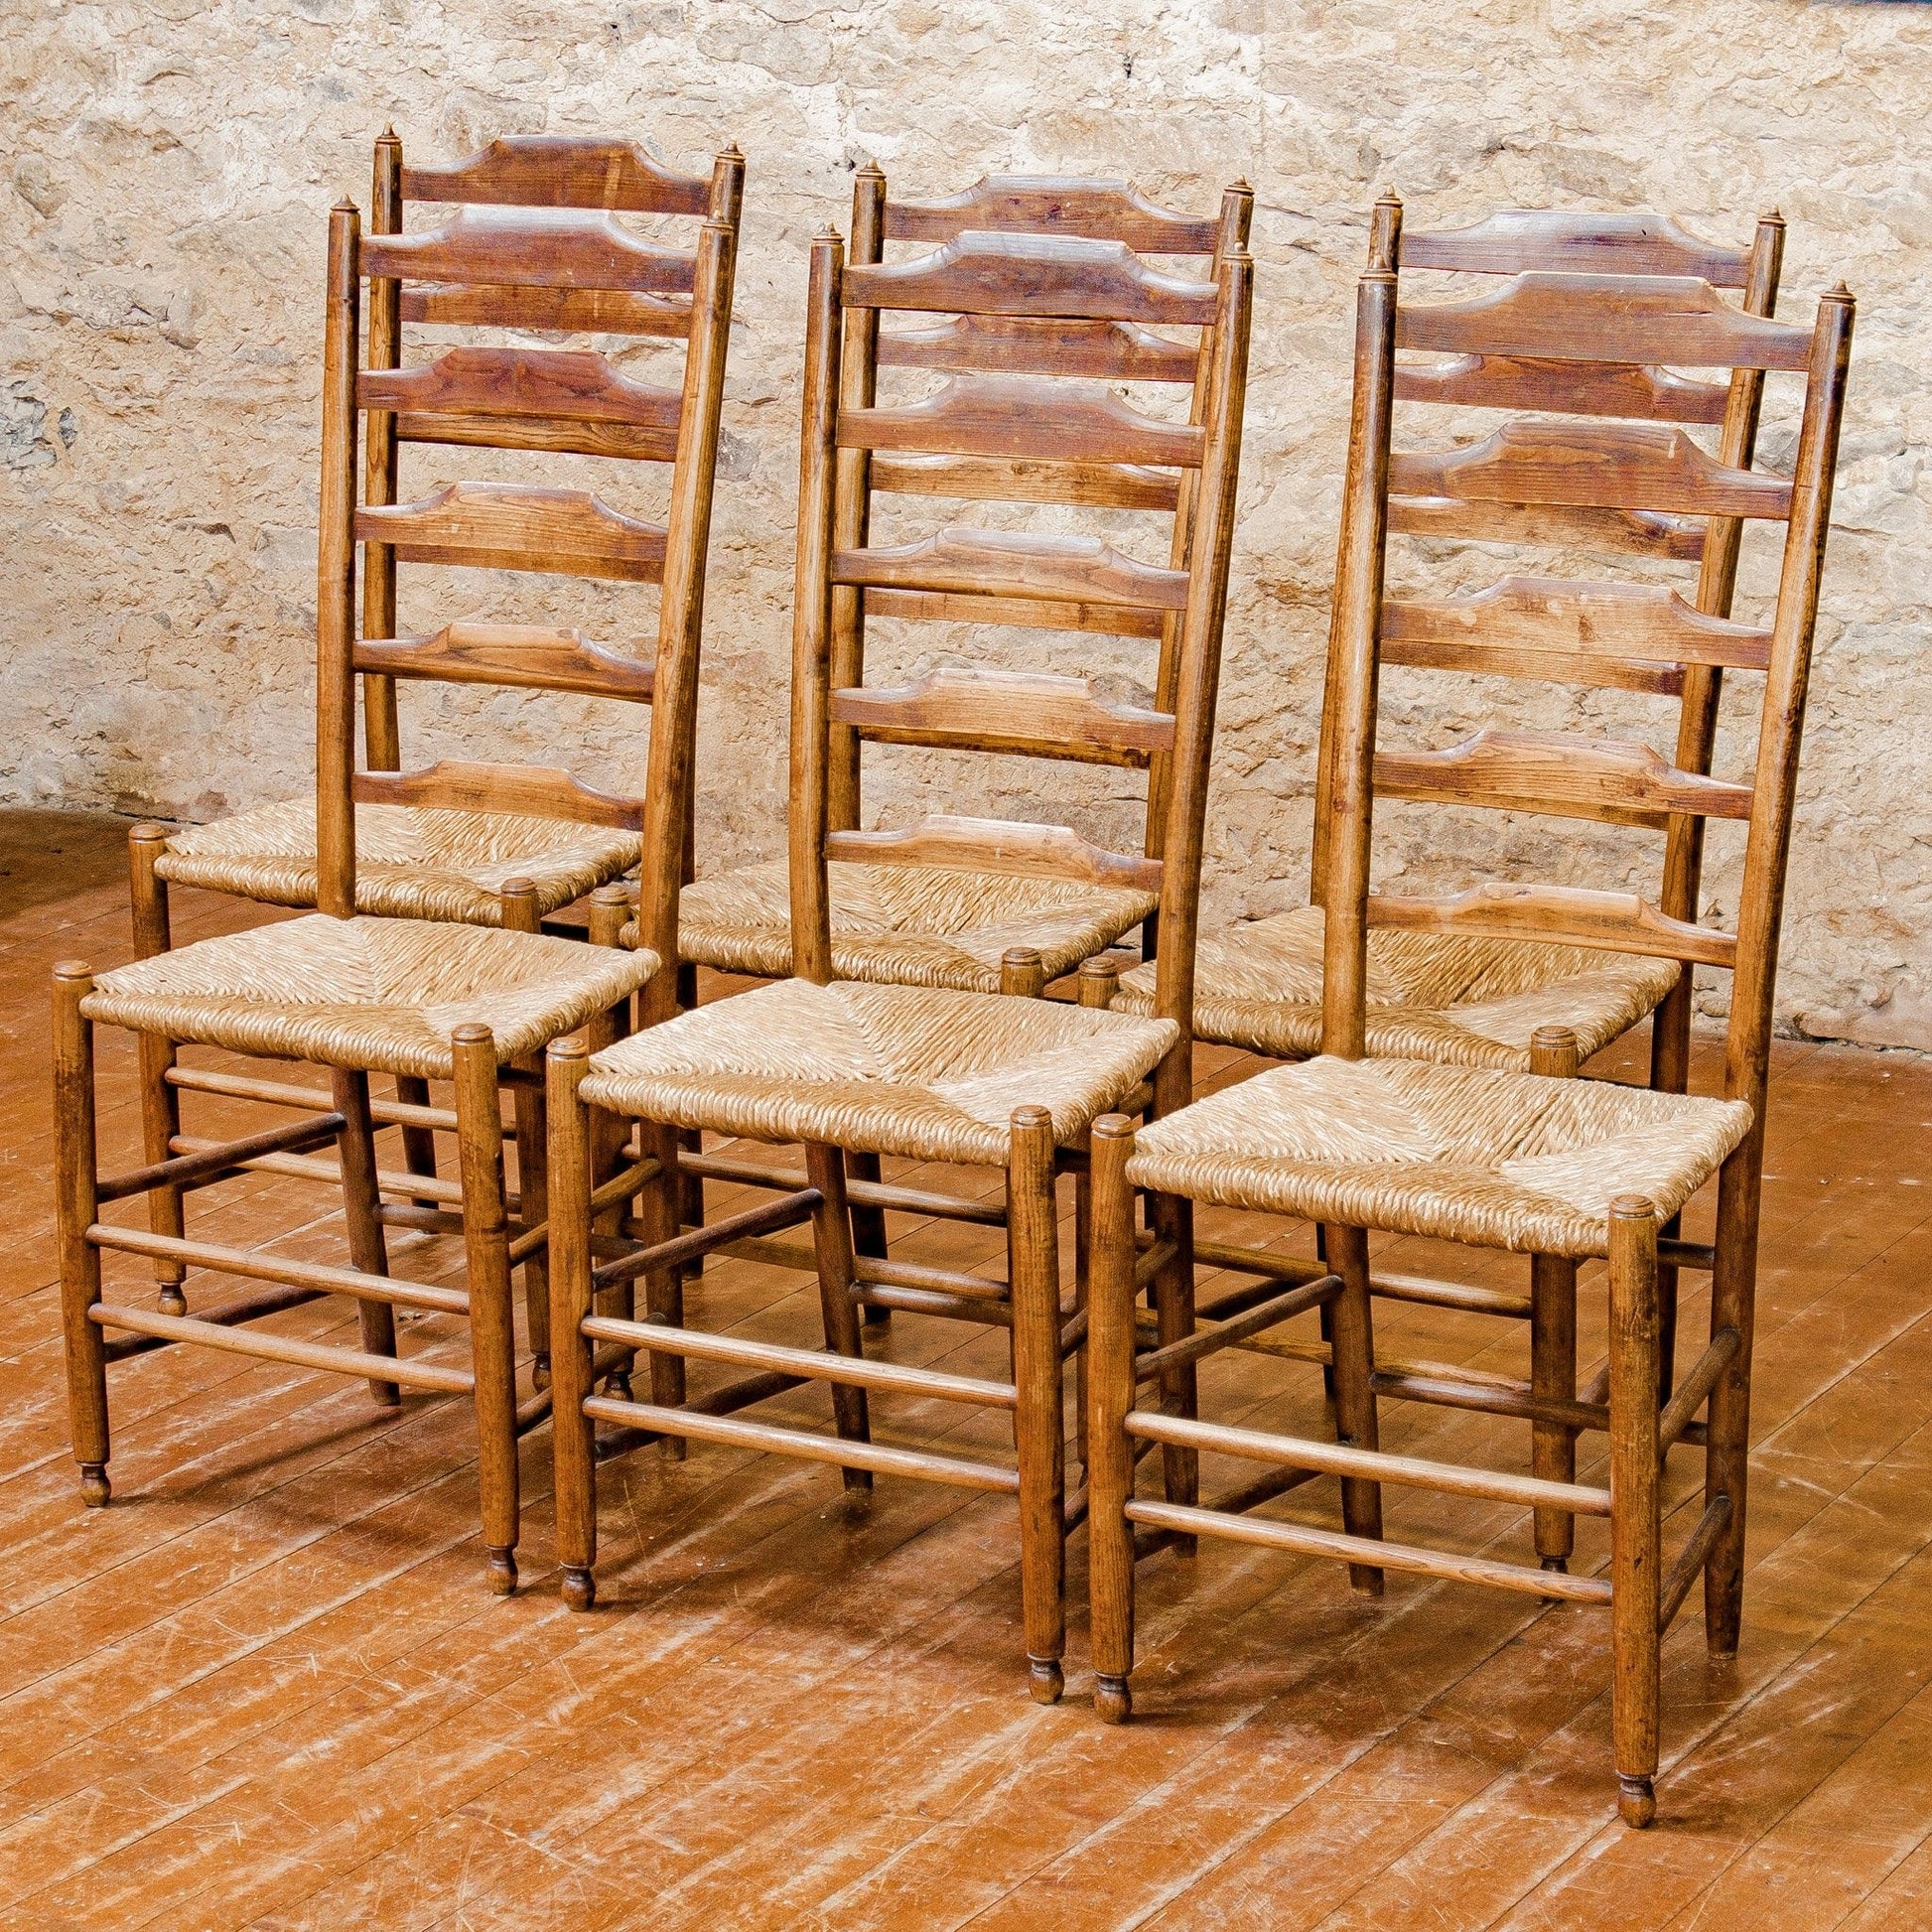 Set of 6 Philip Clissett Arts & Crafts Cotswold School Ash Ladderback Chairs